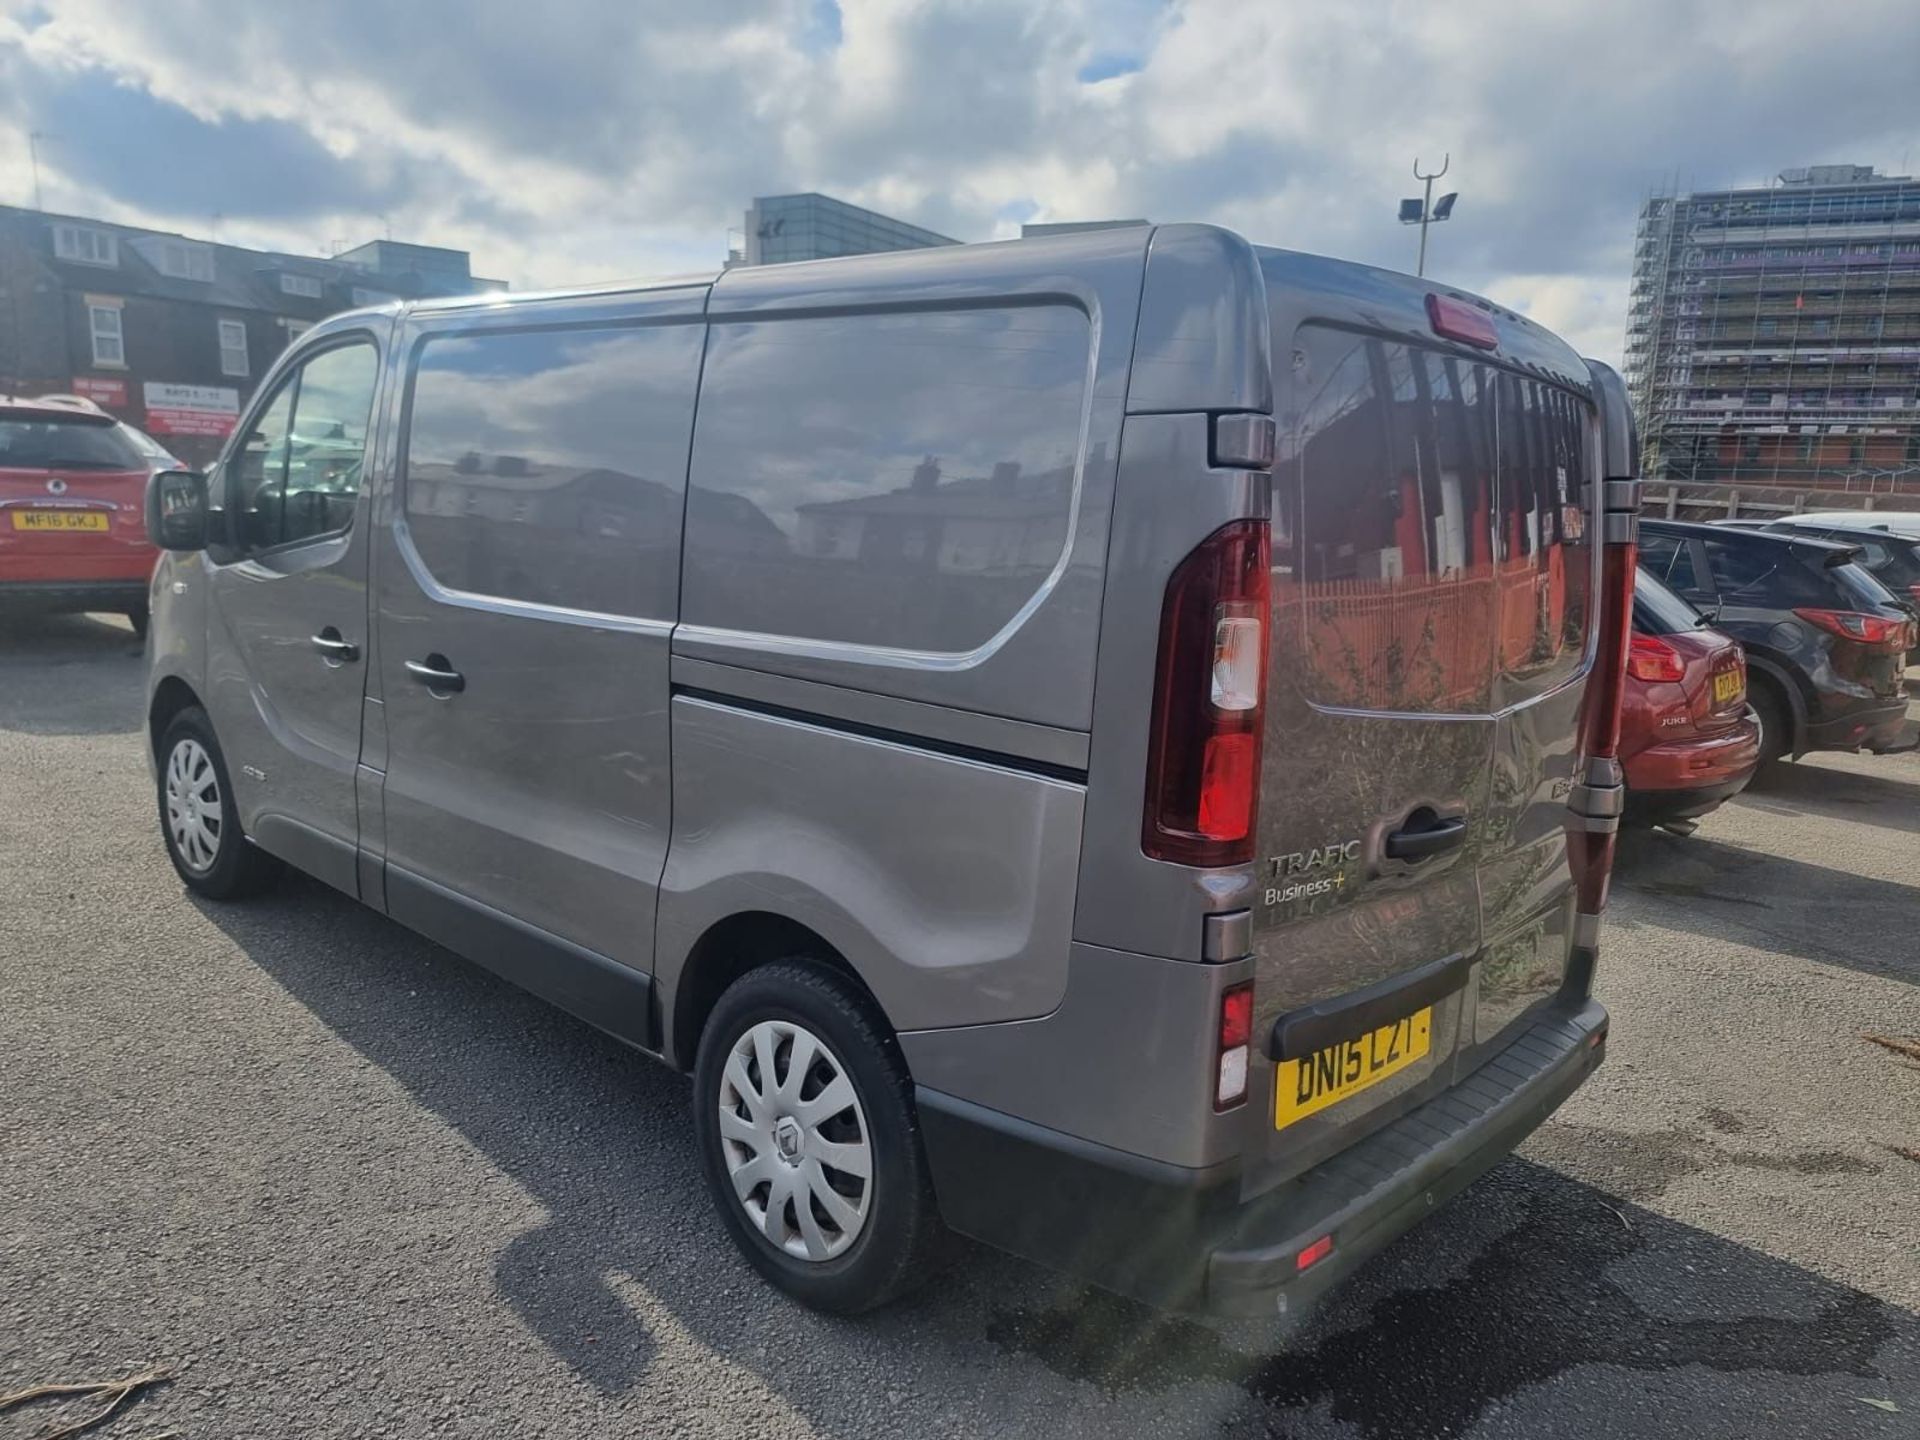 DN15 LZT RENAULT TRAFIC 2.7T 1.6 SL27 DCI 115 BUSINESS+ Panel Van. Comes with 1 key Date of - Image 2 of 7